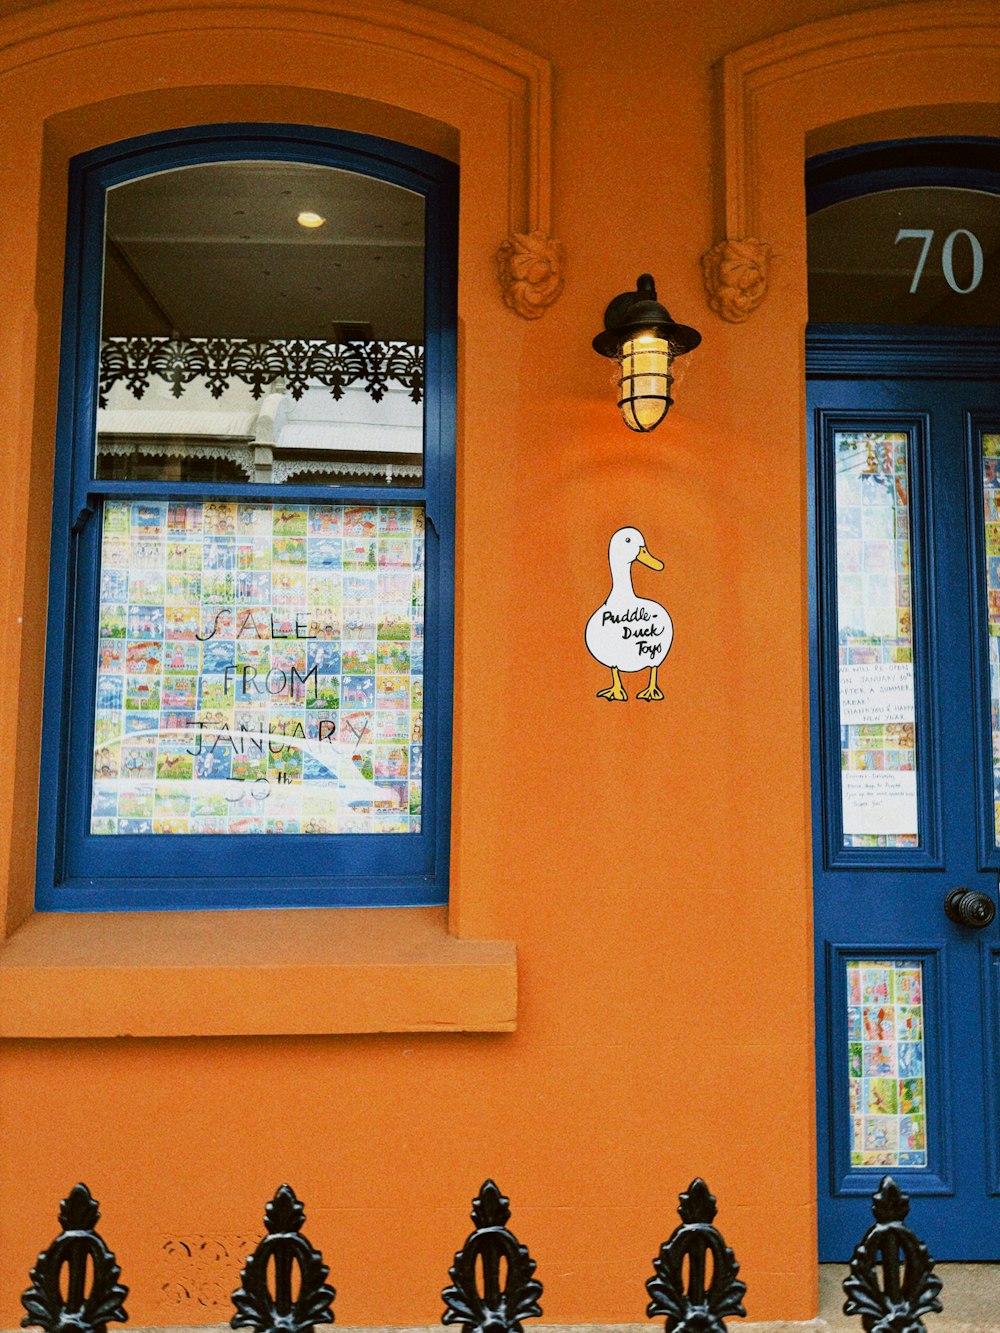 a yellow building with a blue door and a white duck on it